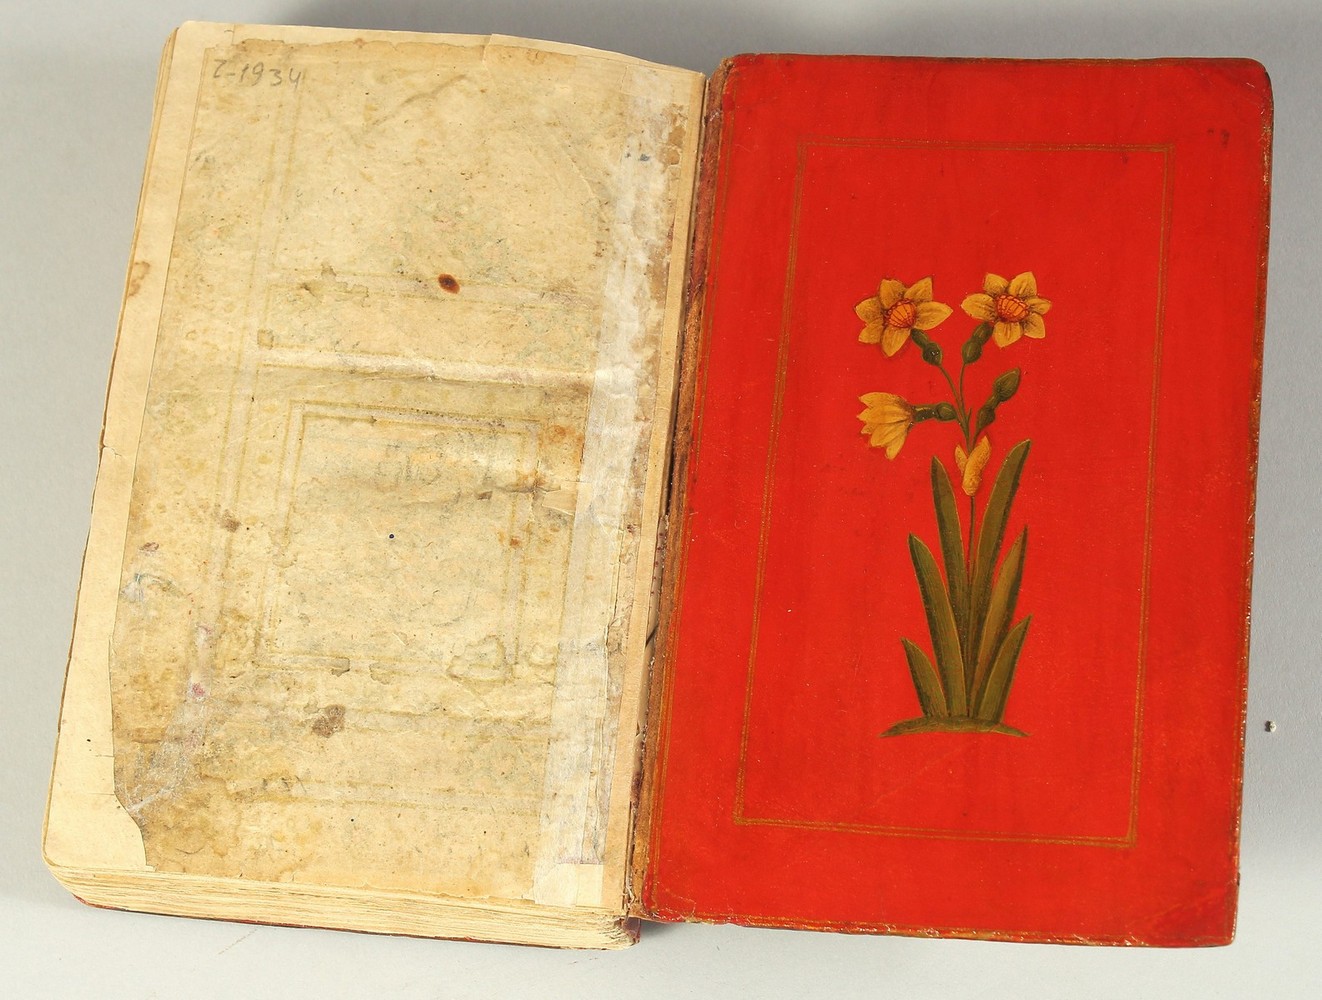 A FINE PERSIAN QAJAR LACQUERED COVER QURAN, signed and dated, the covers painted with flora, 15cm - Image 3 of 7